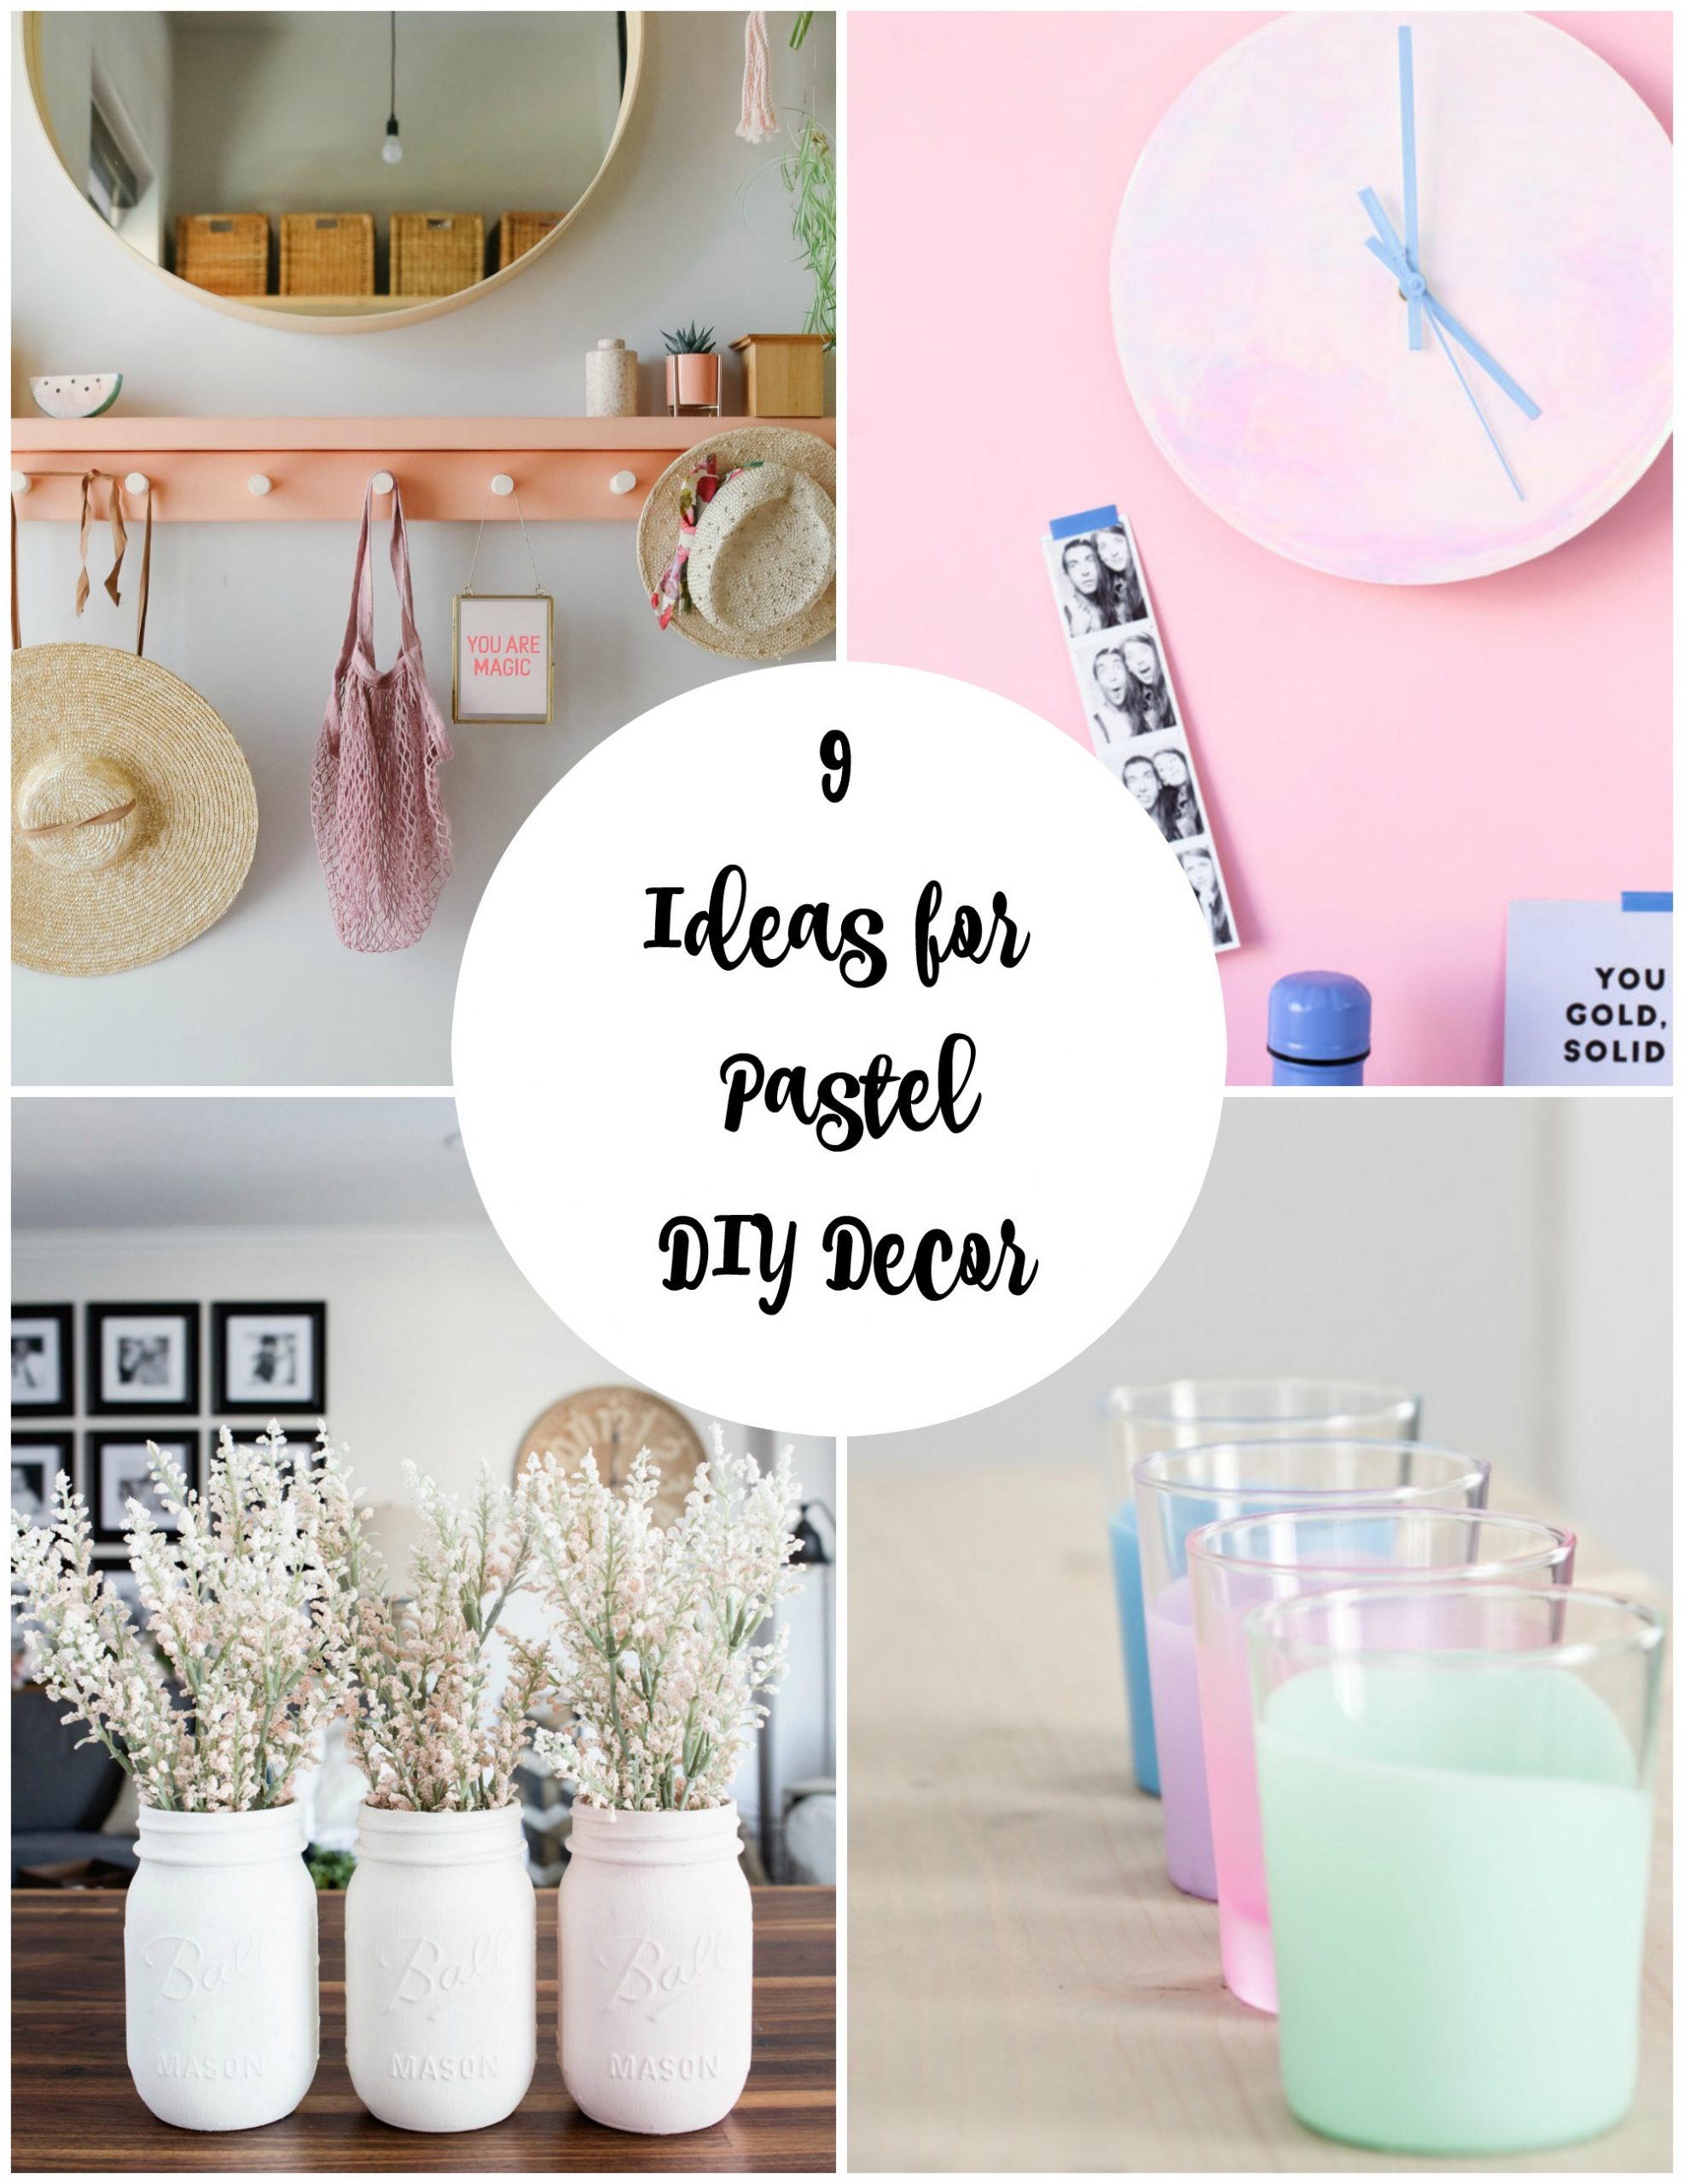 9 Now Ideas for Pastel DIY Decor - Make and Takes